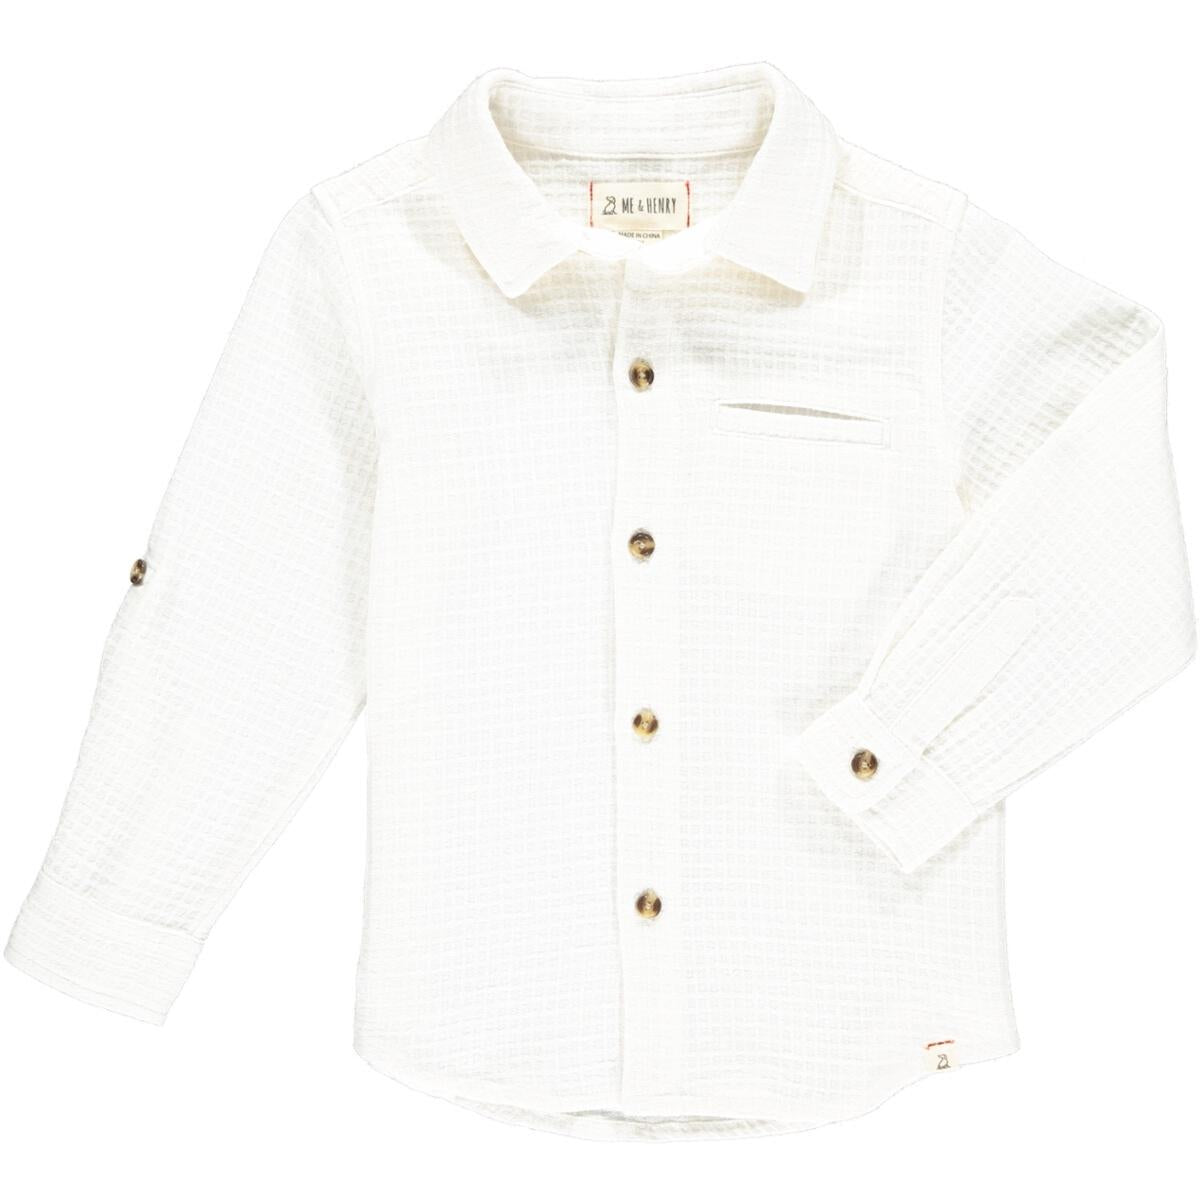 me and Henry Atwood white woven long sleeve button up shirt, linen blend, cotton, lightweight, dressy, long sleeve, summer, spring, dress shirt, collared, pocket, little boy, baby, toddler